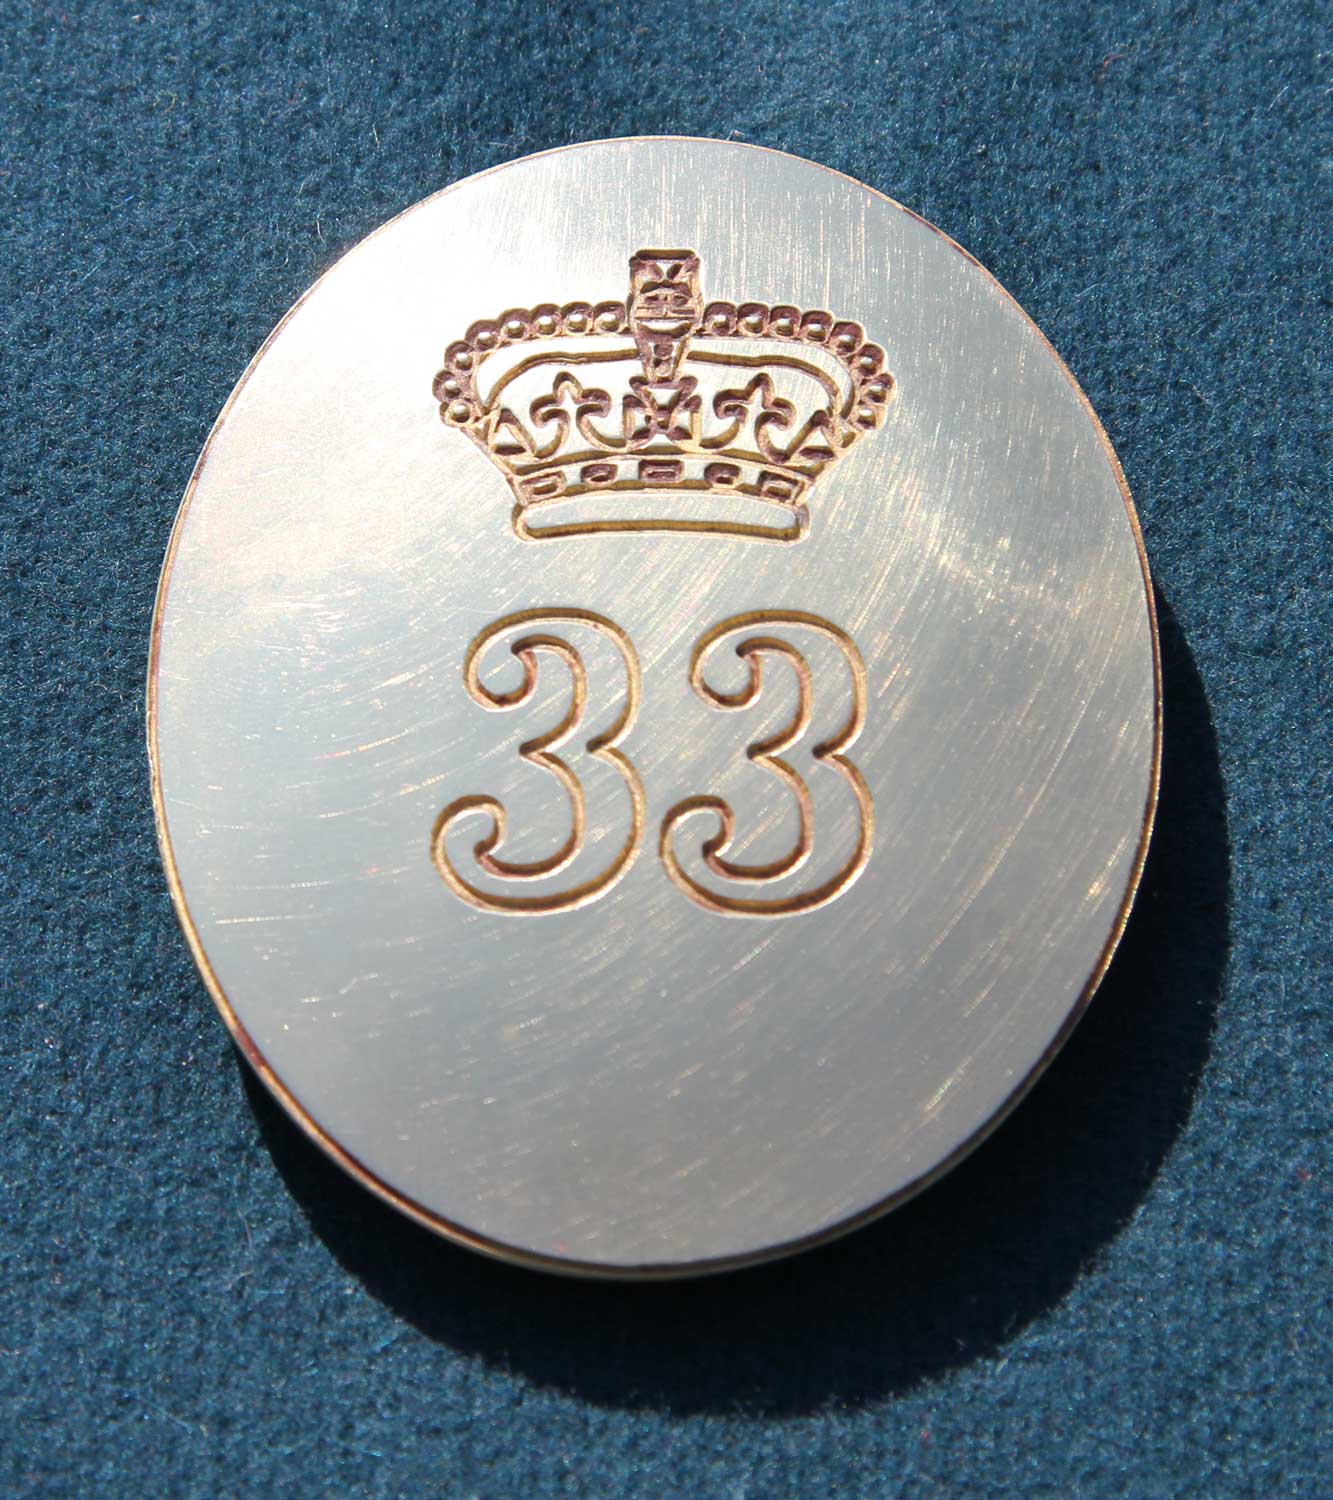 British, 33rd (or Yorkshire) Regiment of Foot